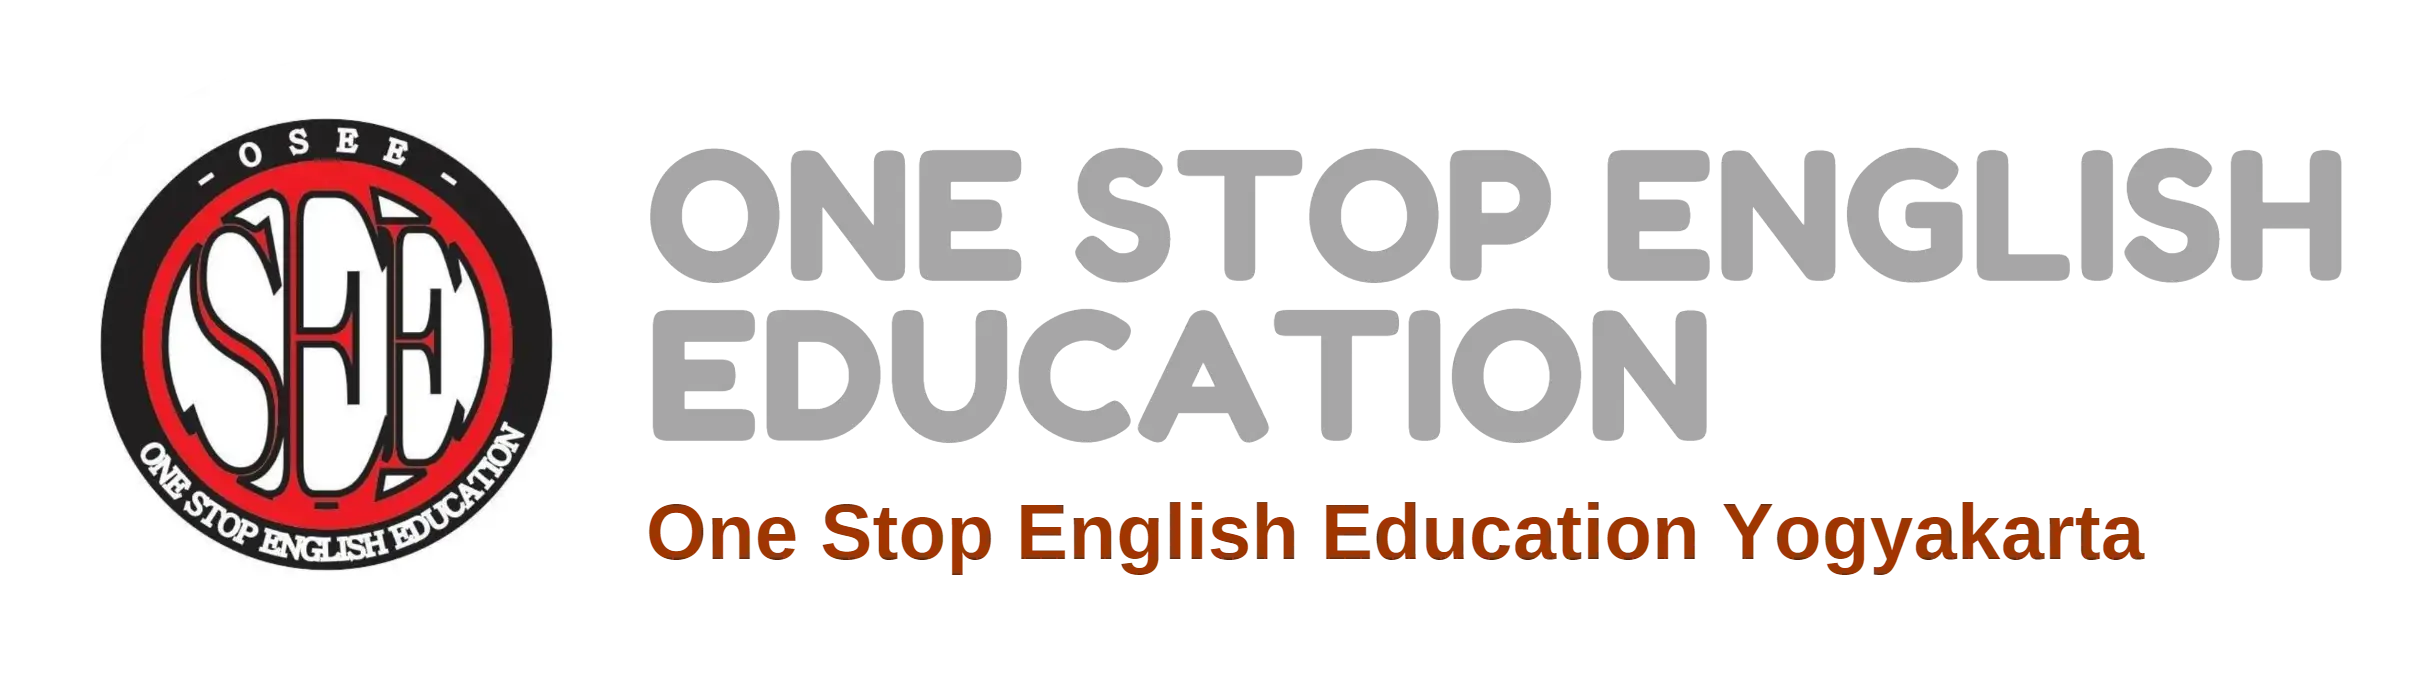 One Stop English Education